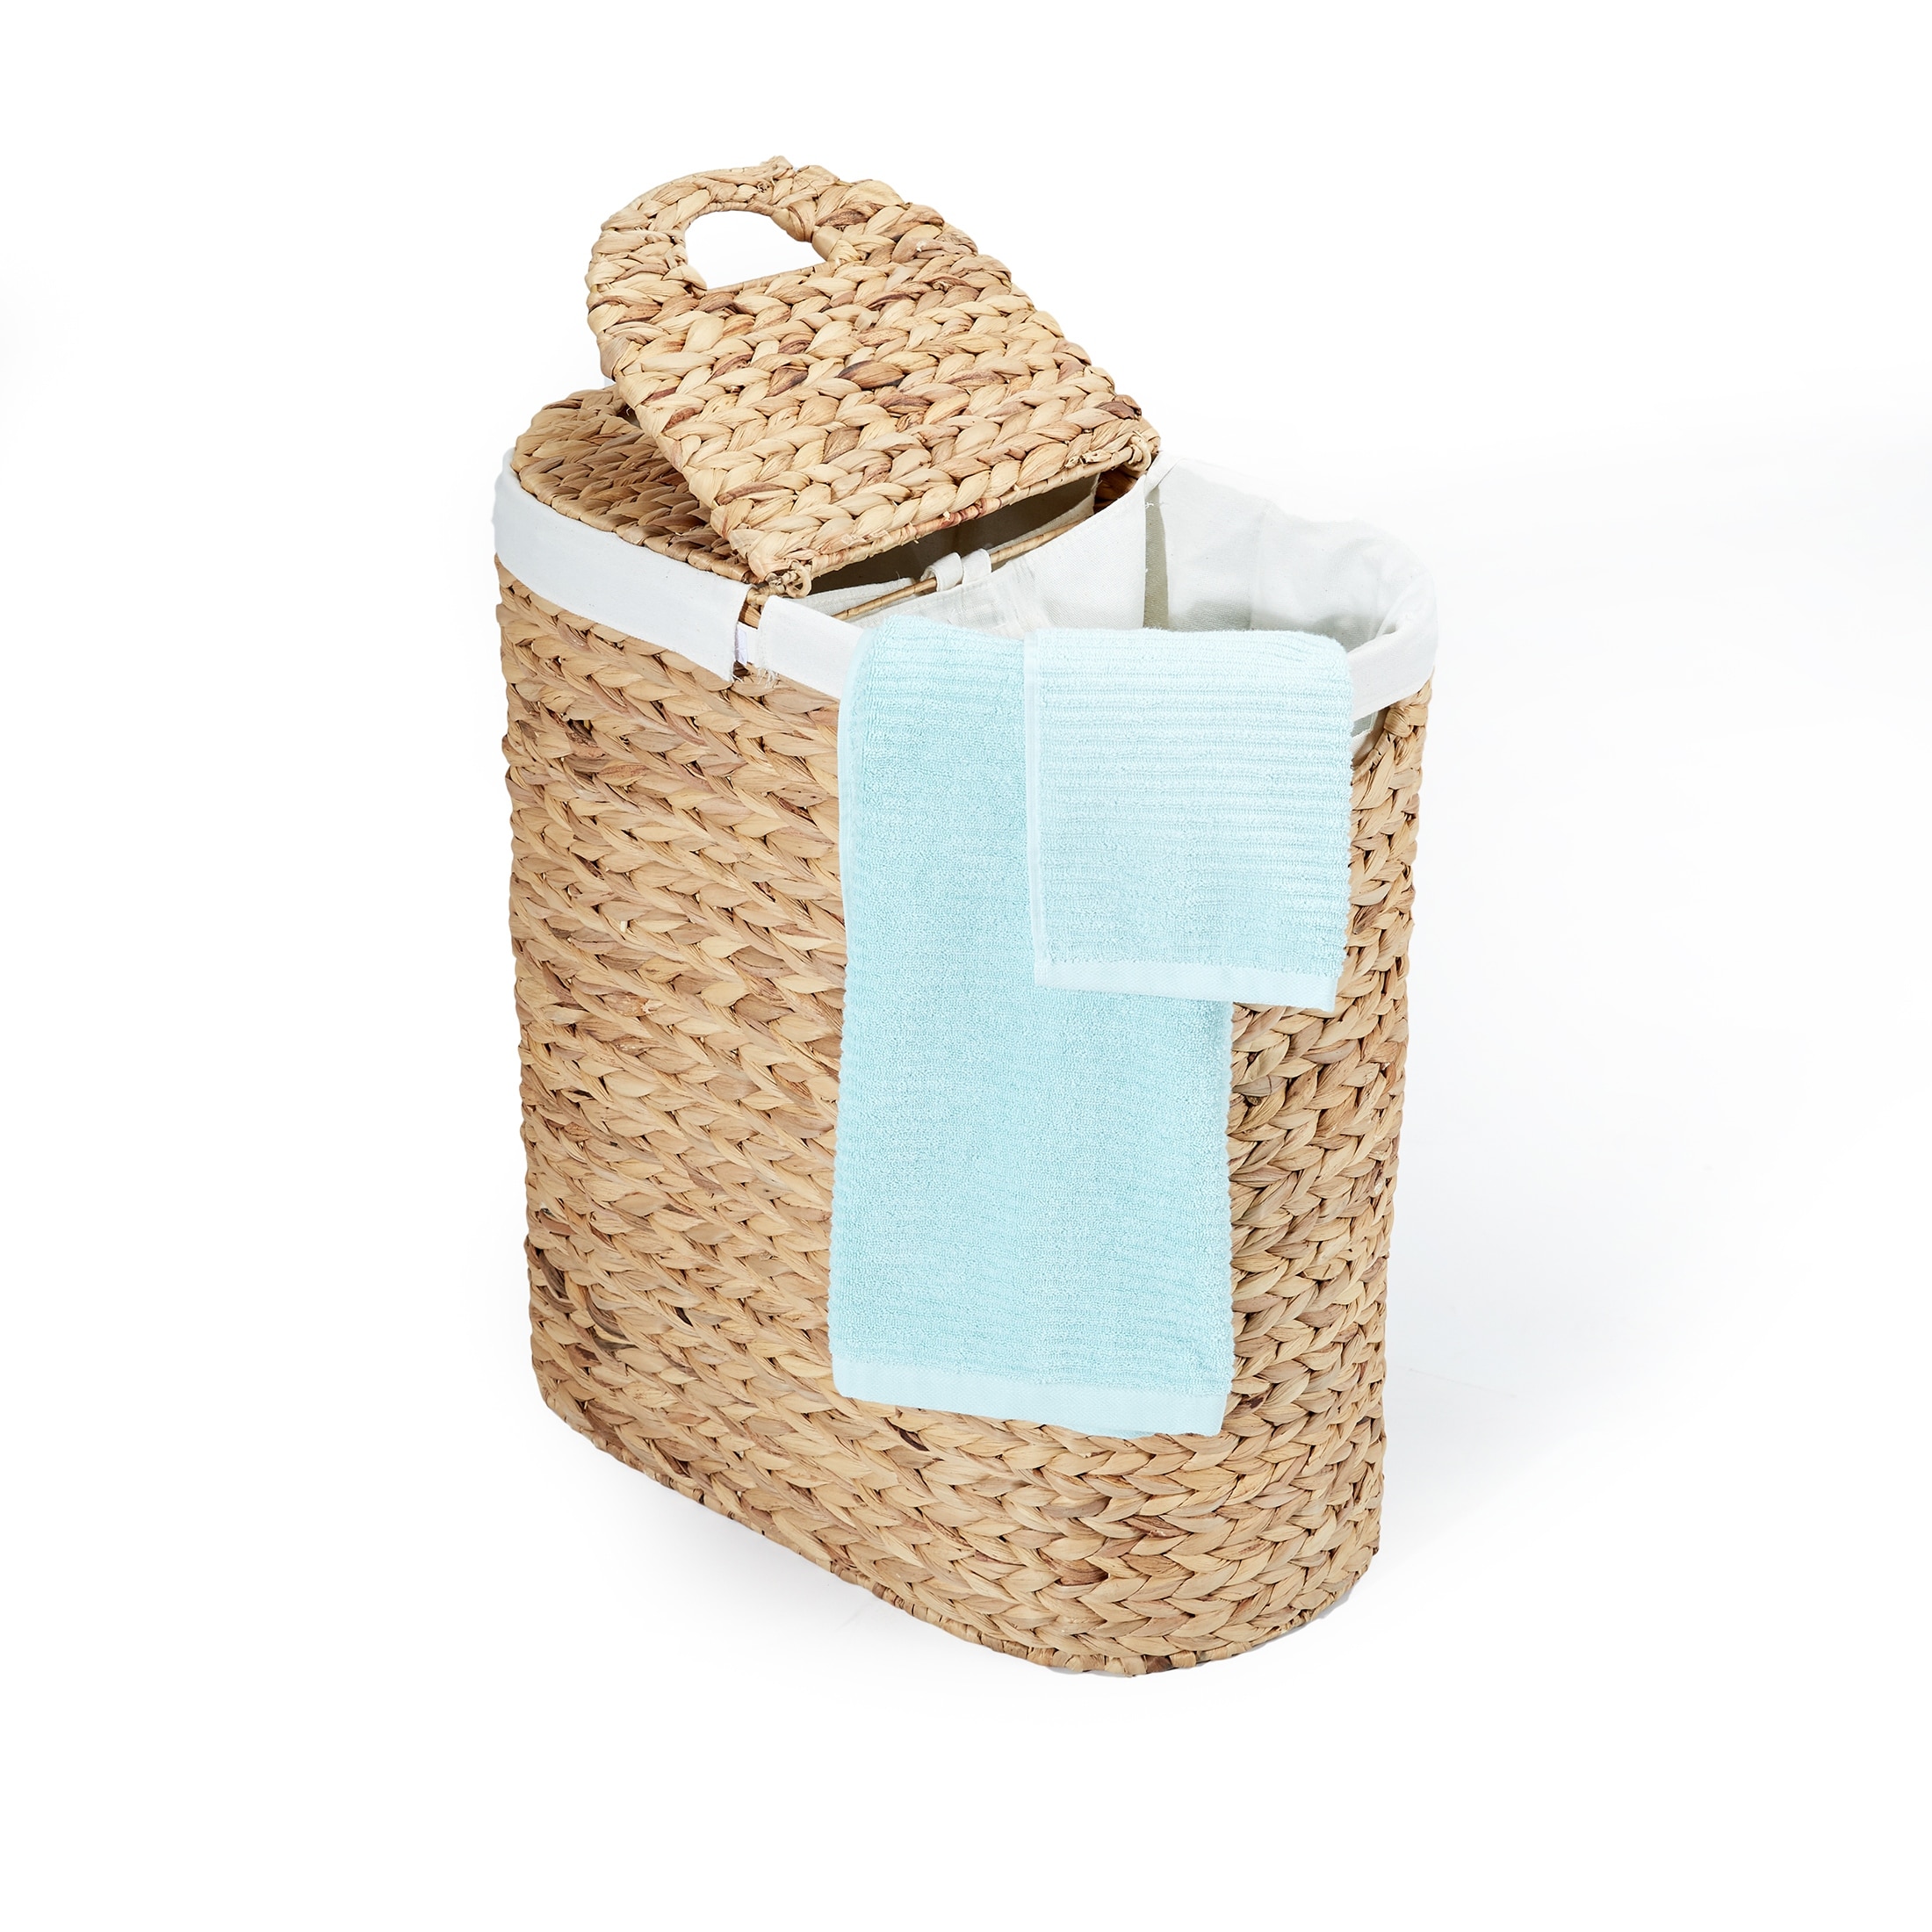 https://ak1.ostkcdn.com/images/products/is/images/direct/2587c5a06e9a228d4dc123a8262a26865fbffccc/Seville-Classics-Hand-Woven-Natural-Wicker-Water-Hyacinth-Lidded-Oval-Double-Laundry-Hamper.jpg